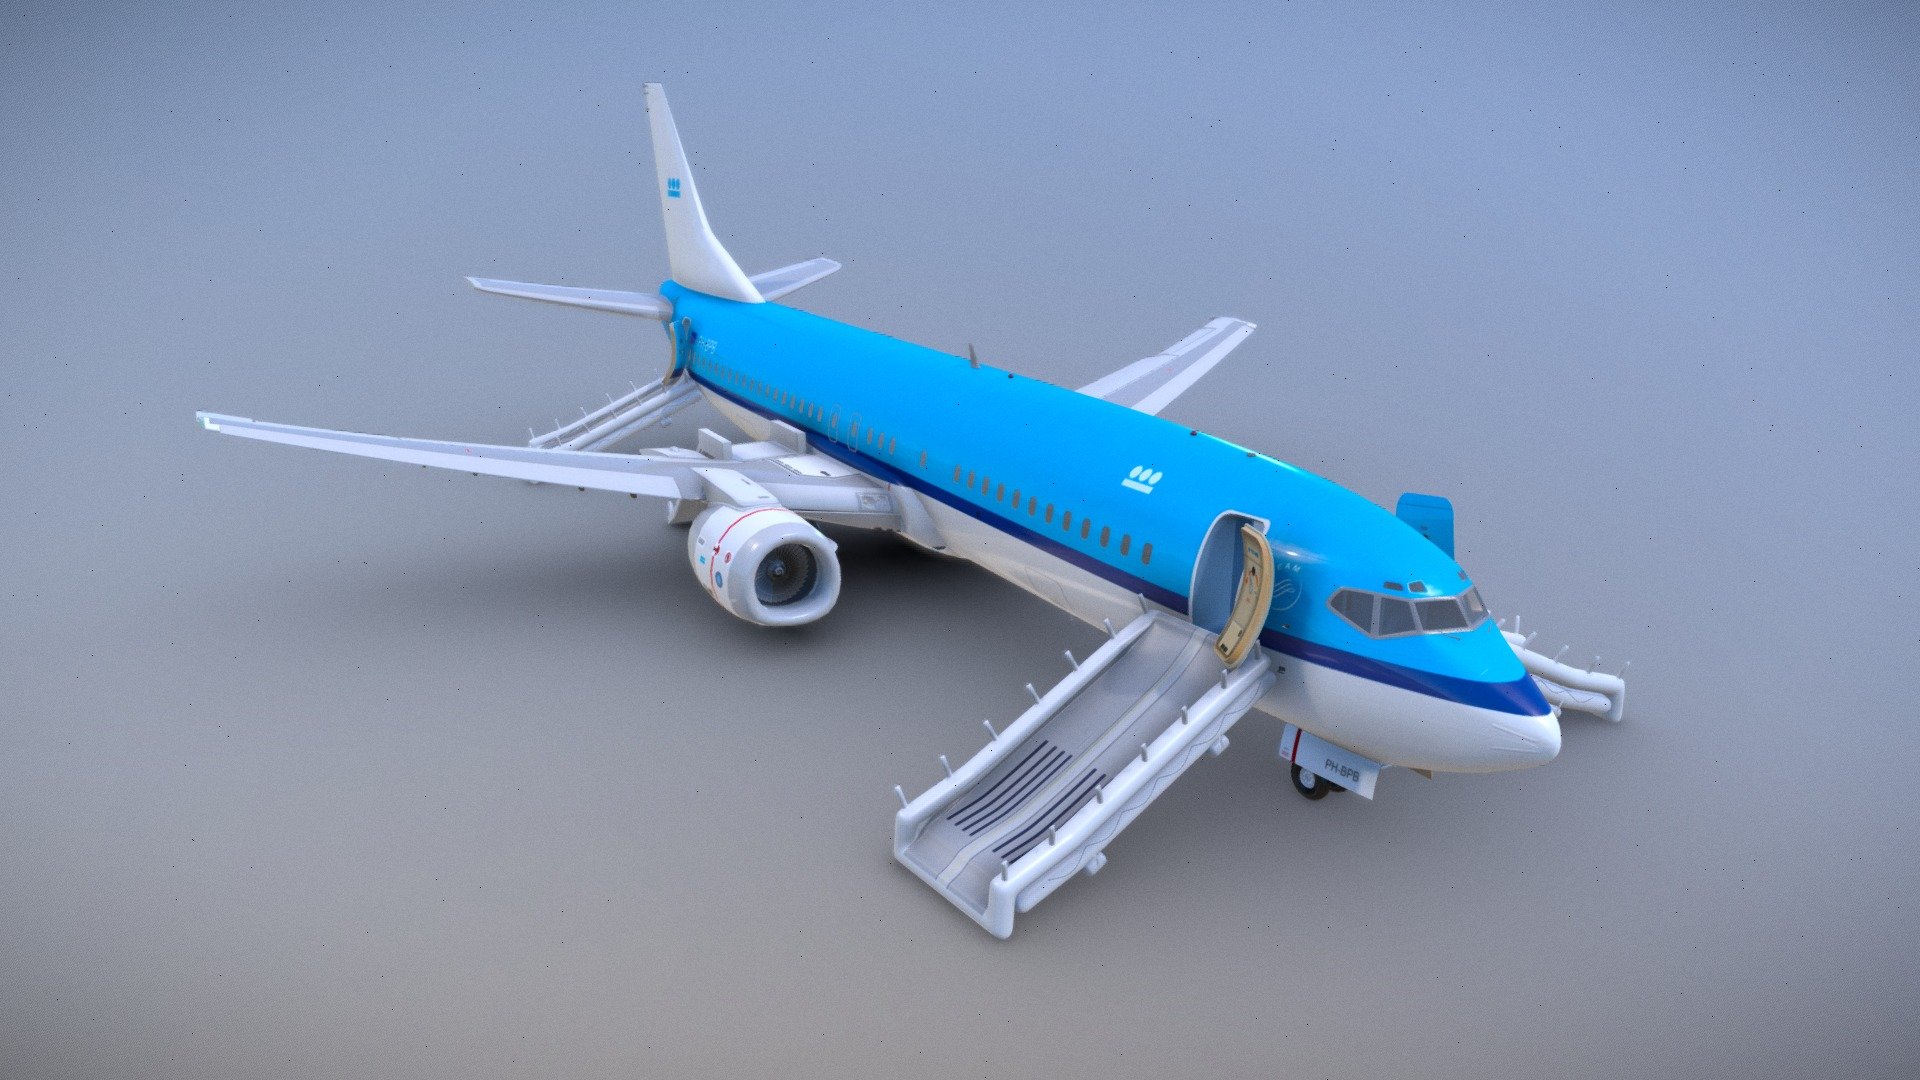 Passenger airplane with emergency evacuation slides deployed.

An evacuation slide is an inflatable slide used to evacuate an aircraft quickly.

Created in 3ds Max and converted to USDZ using Xcode. No interior, for external views only 3d model